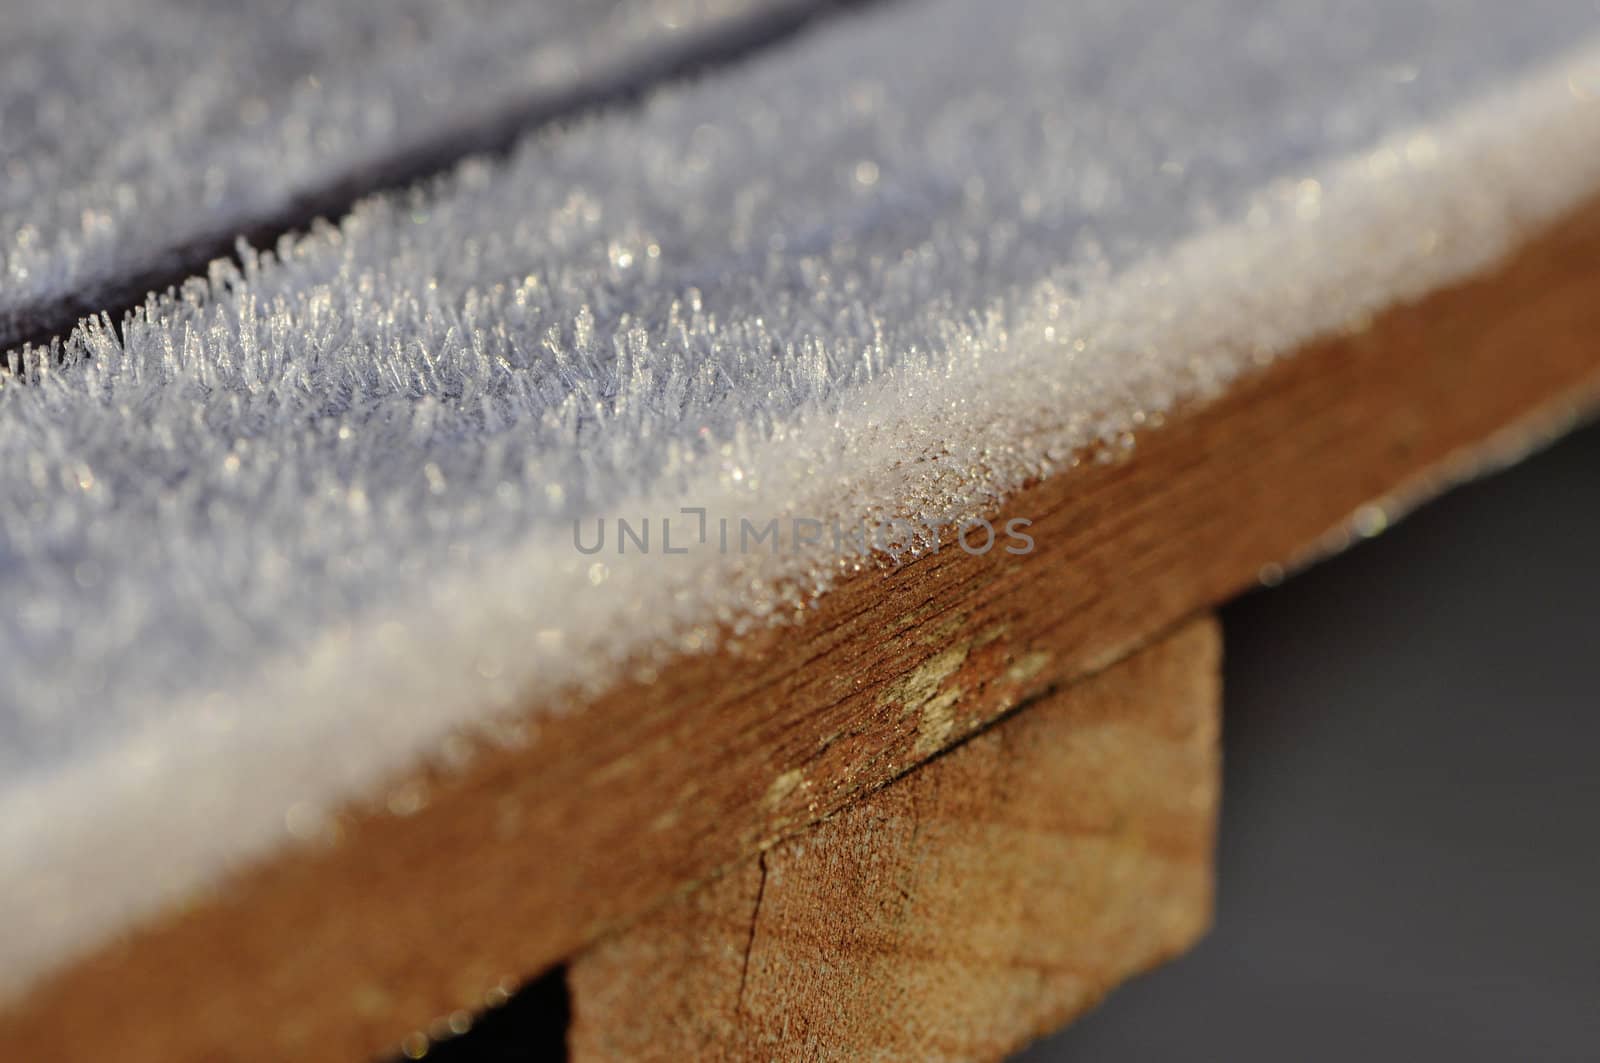 Frost on brown wood table with a thin dept of field